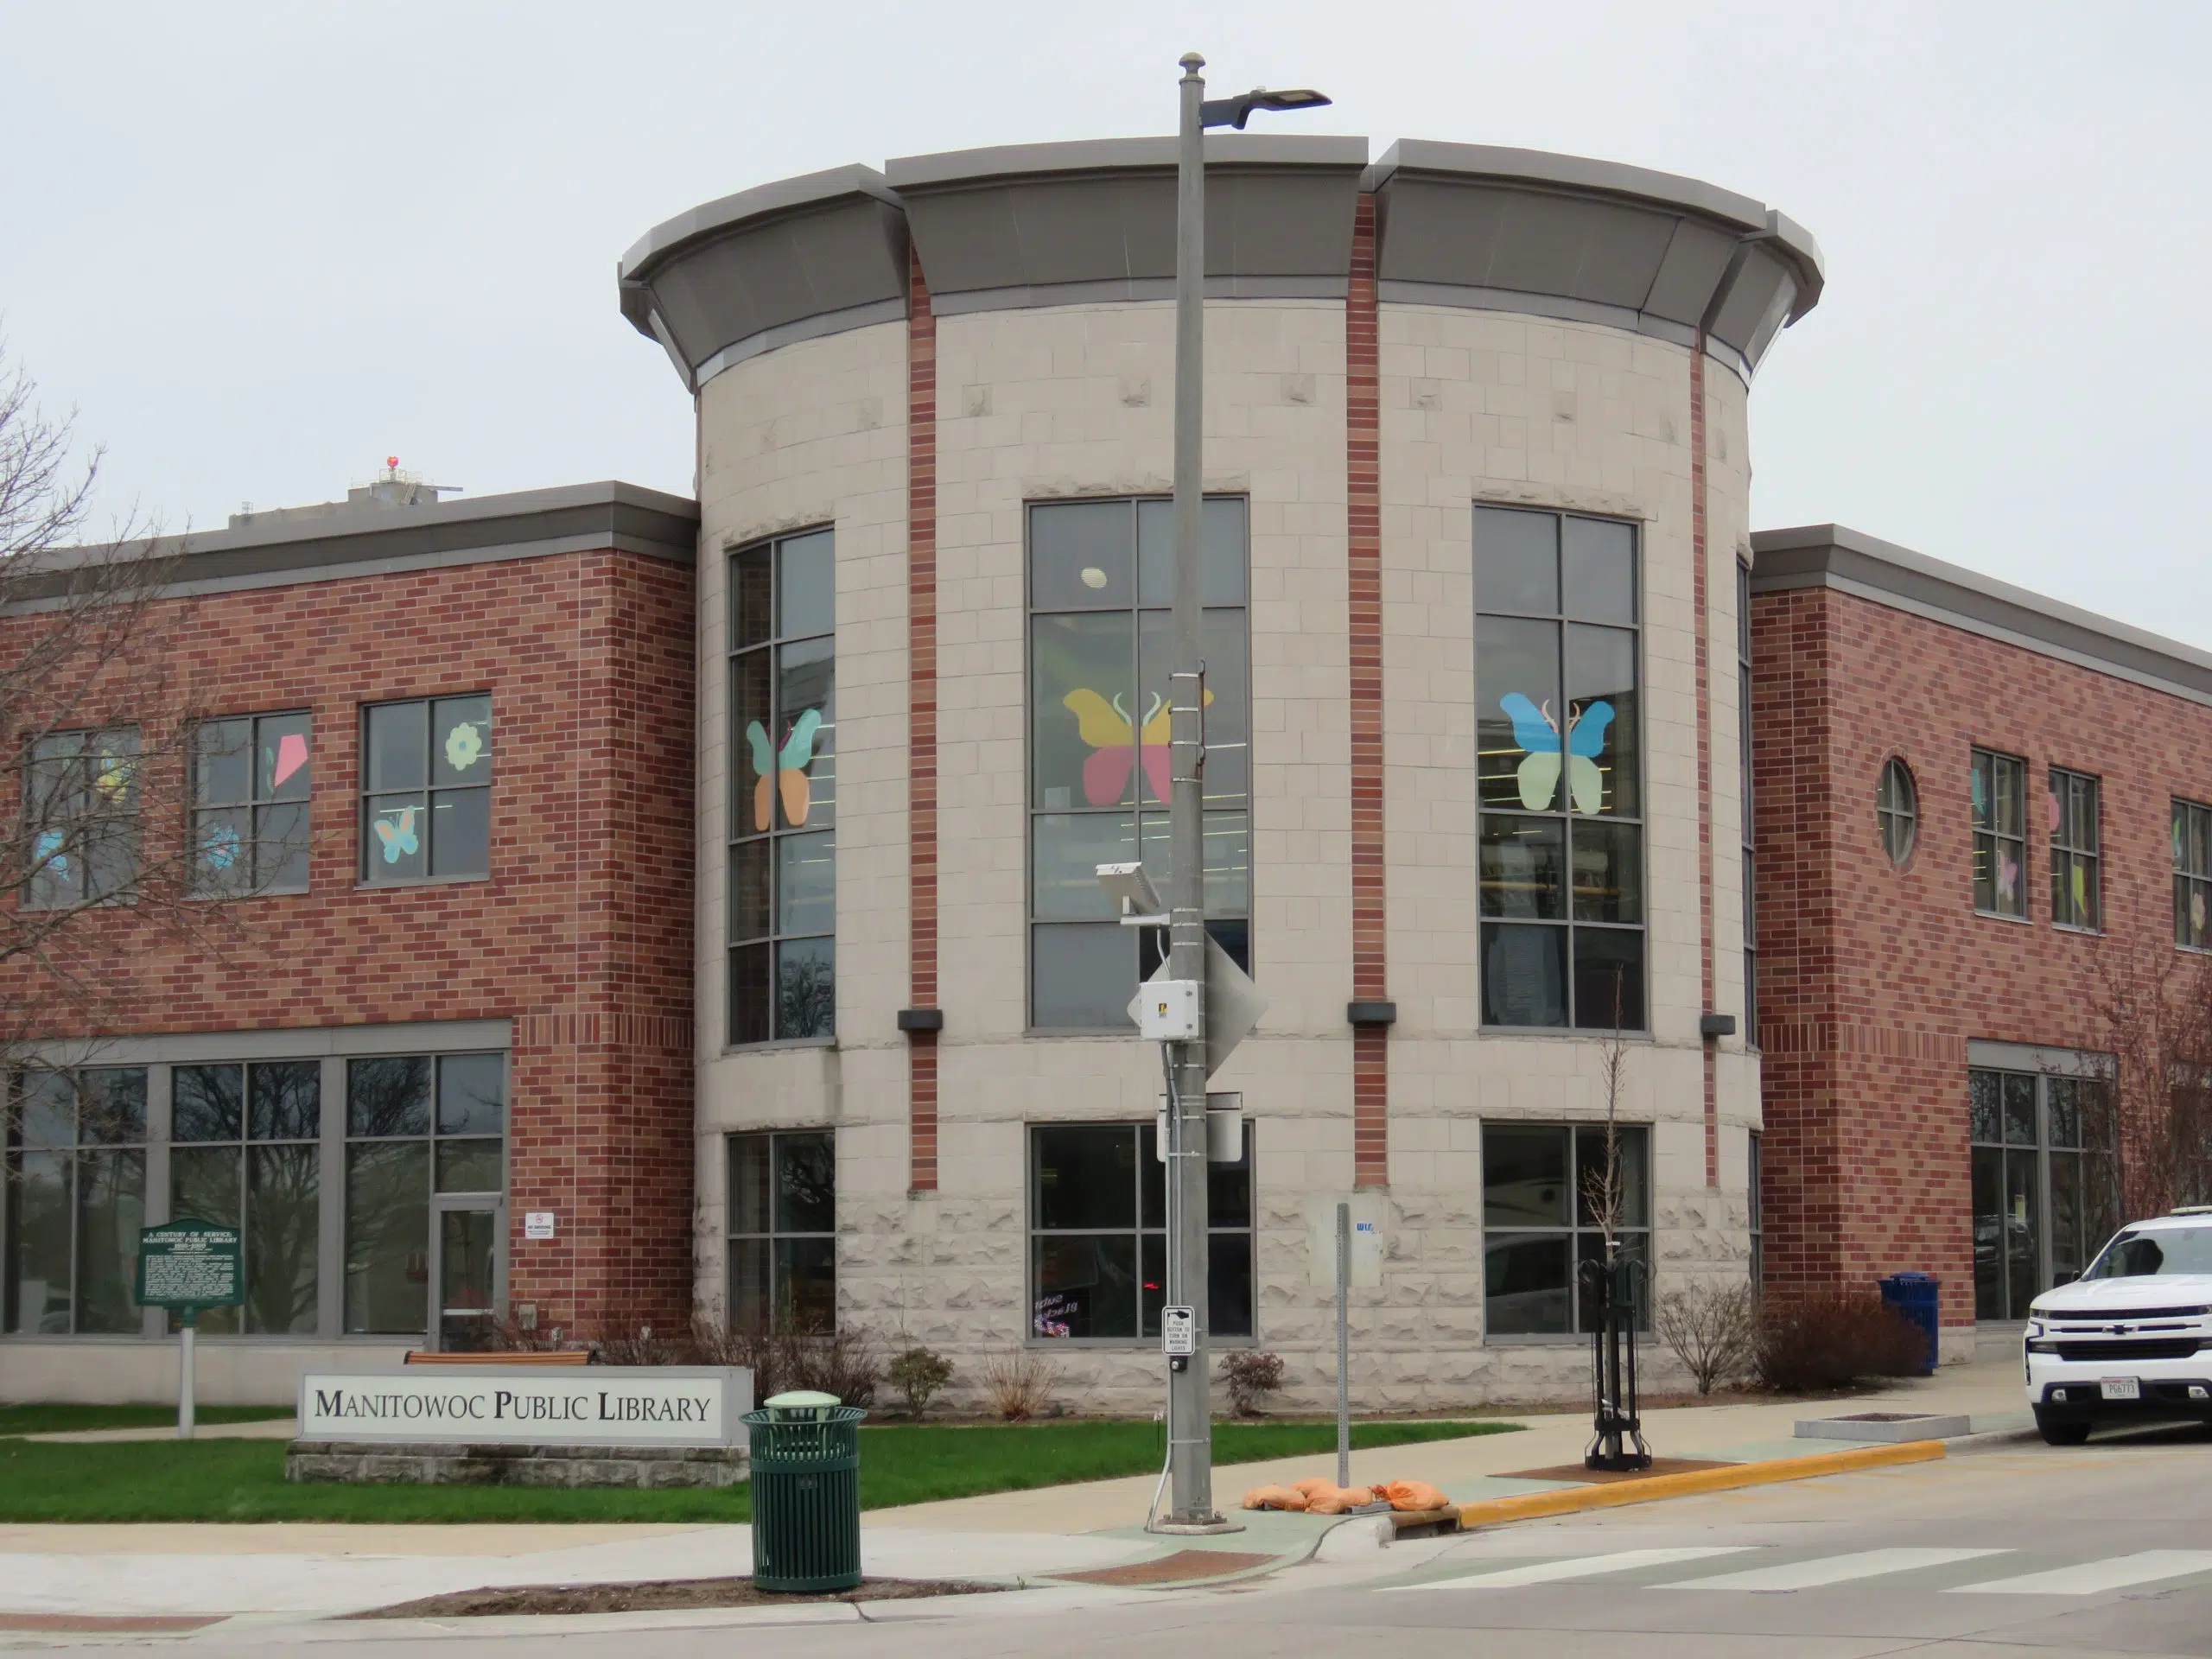 Manitowoc Public Library Promoting Reading Materials Focused on Mental Health